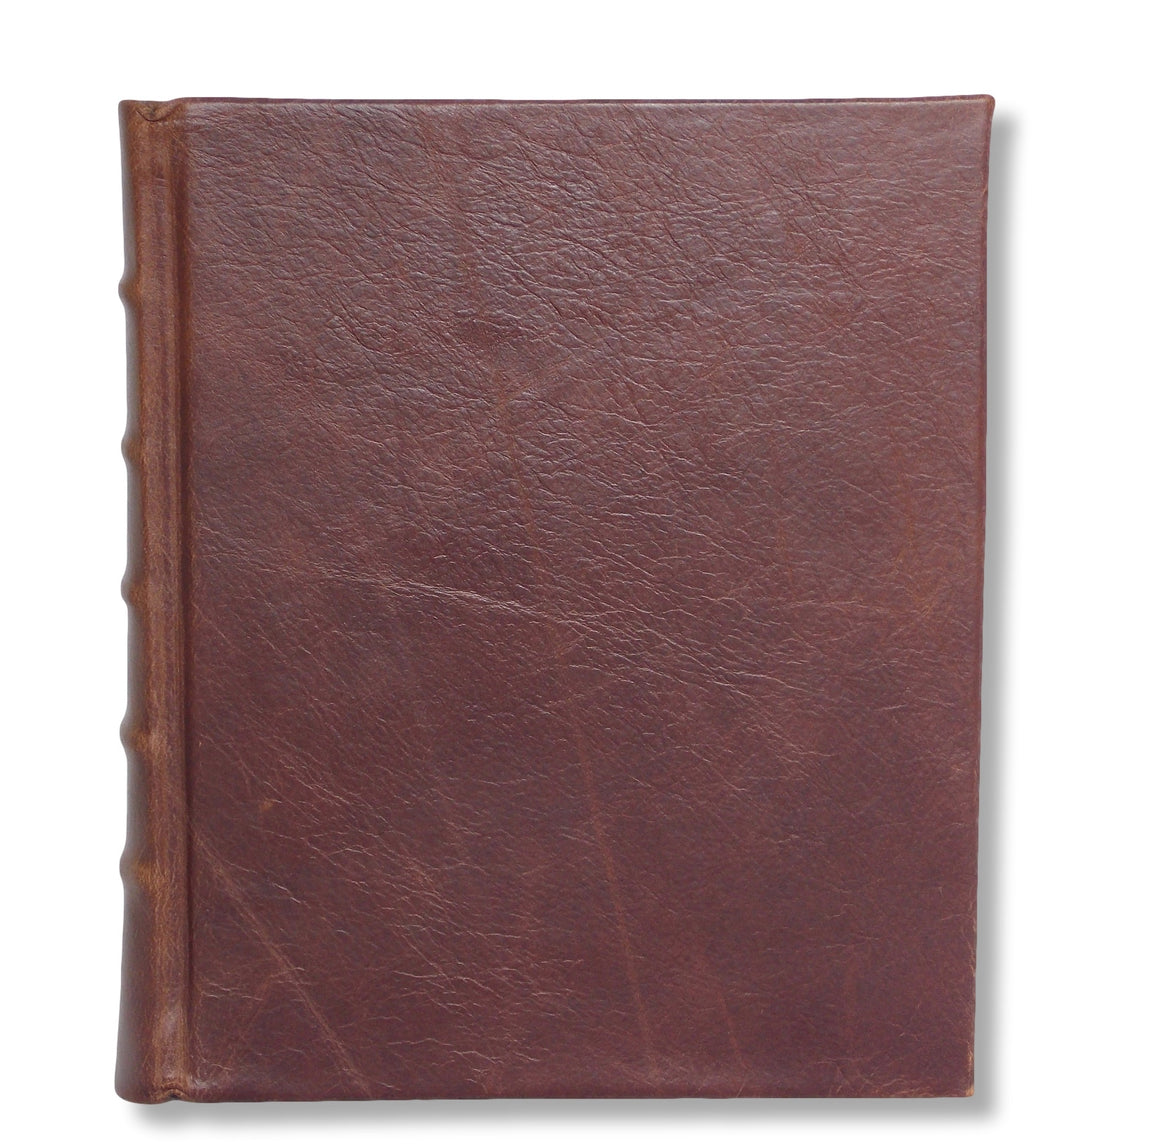 Leather photo album in brown